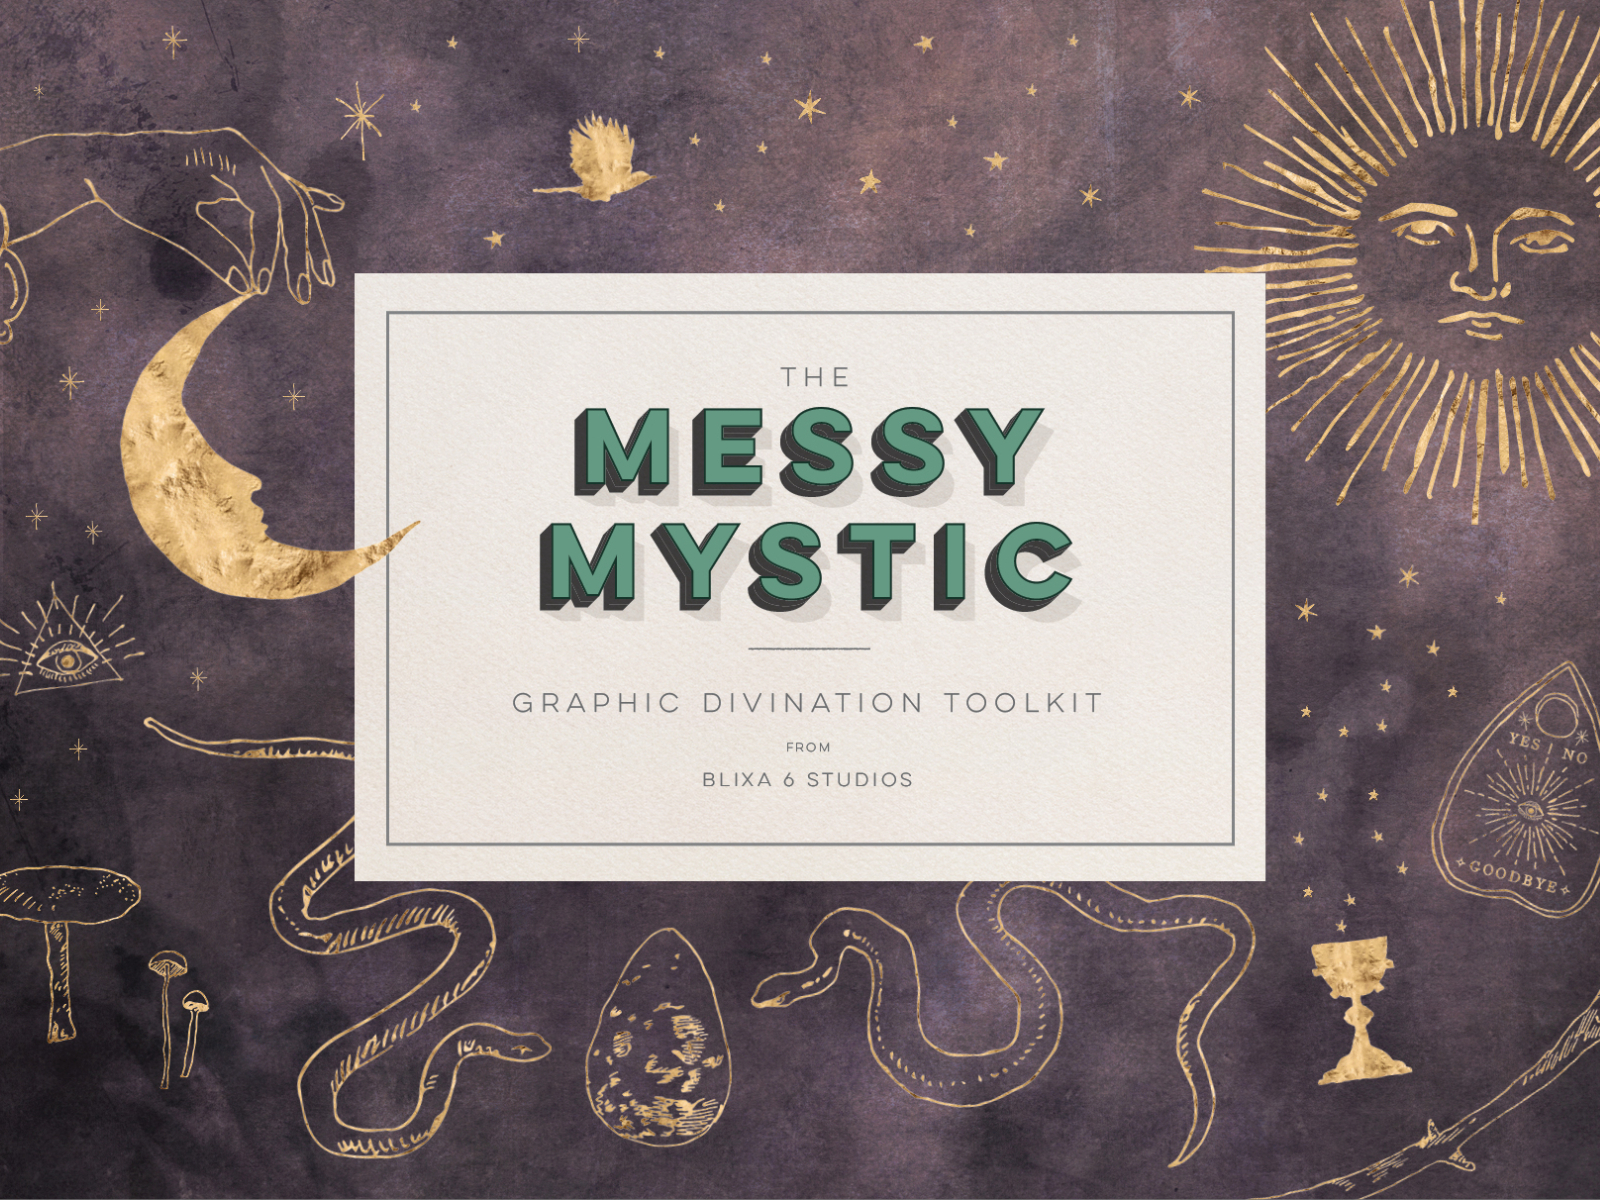 The Messy Mystic Graphic Divination Toolkit by Blixa 6 Studios on Dribbble